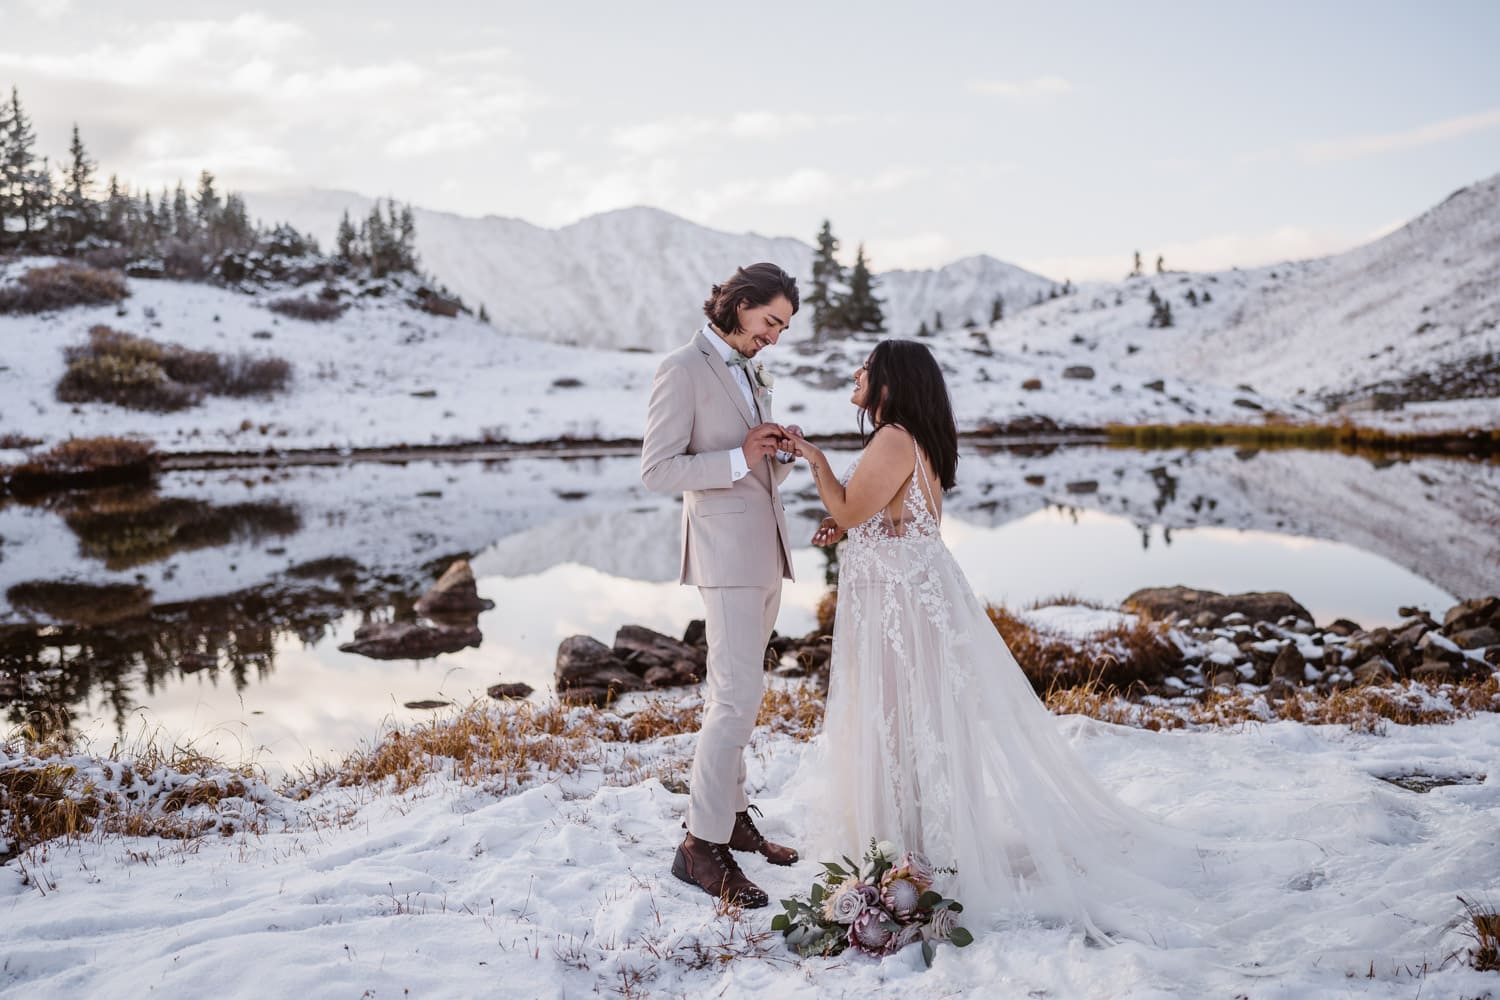 A groom putting the ring on his bride in the snowy Colorado mountains.